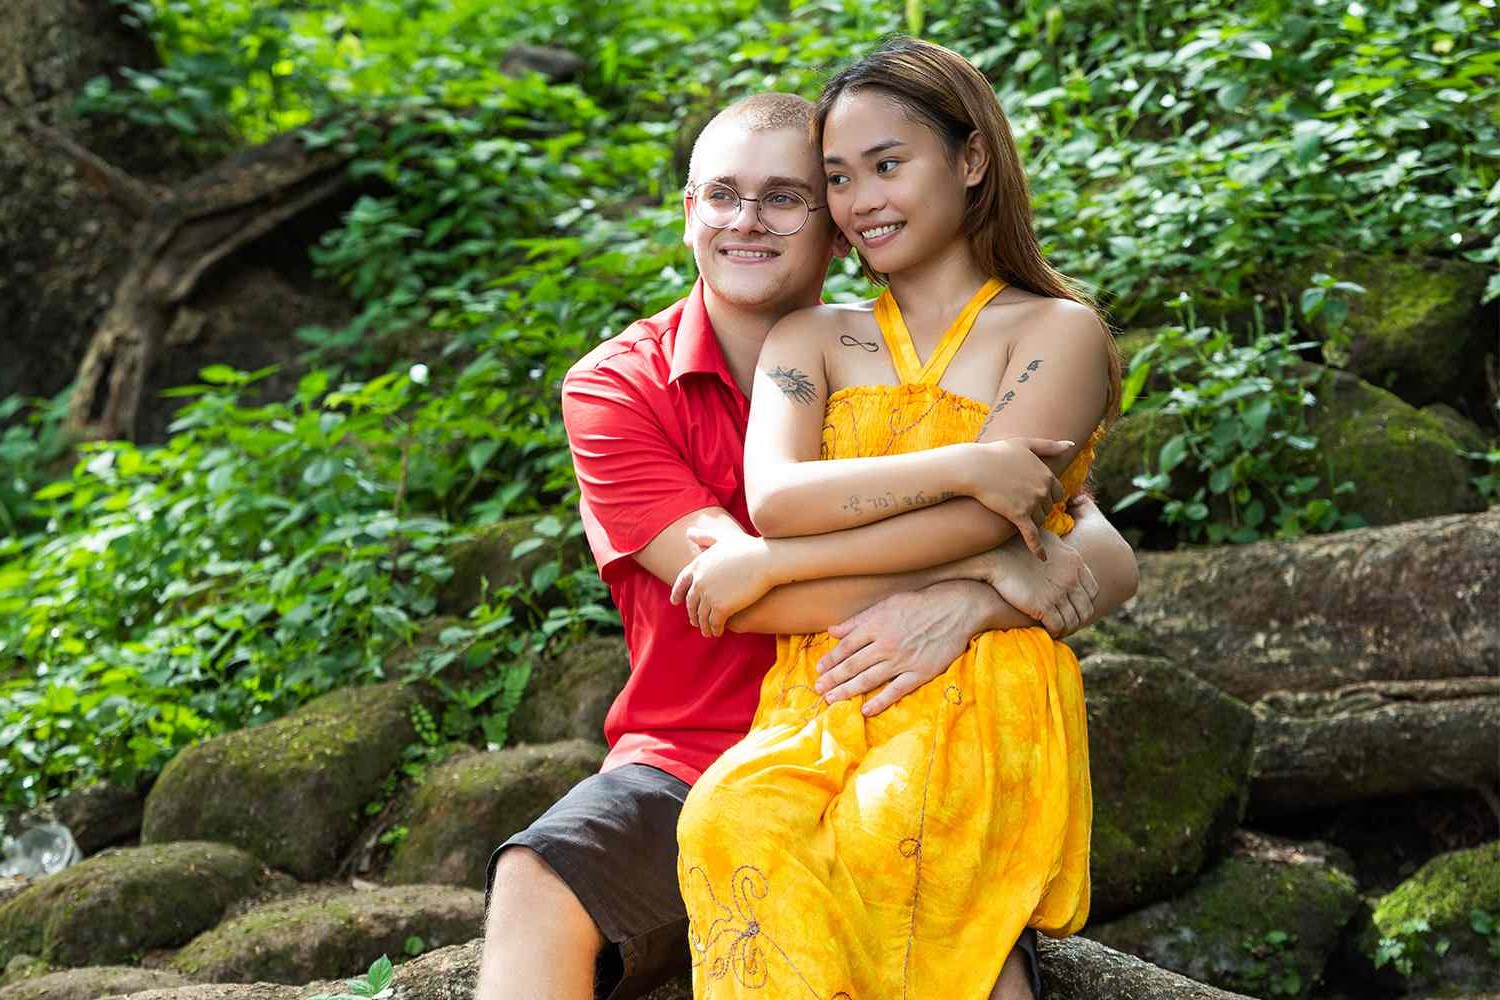 ’90 Day Fiance’ Couple Faces Backlash Over Colon Cancer Fundraiser